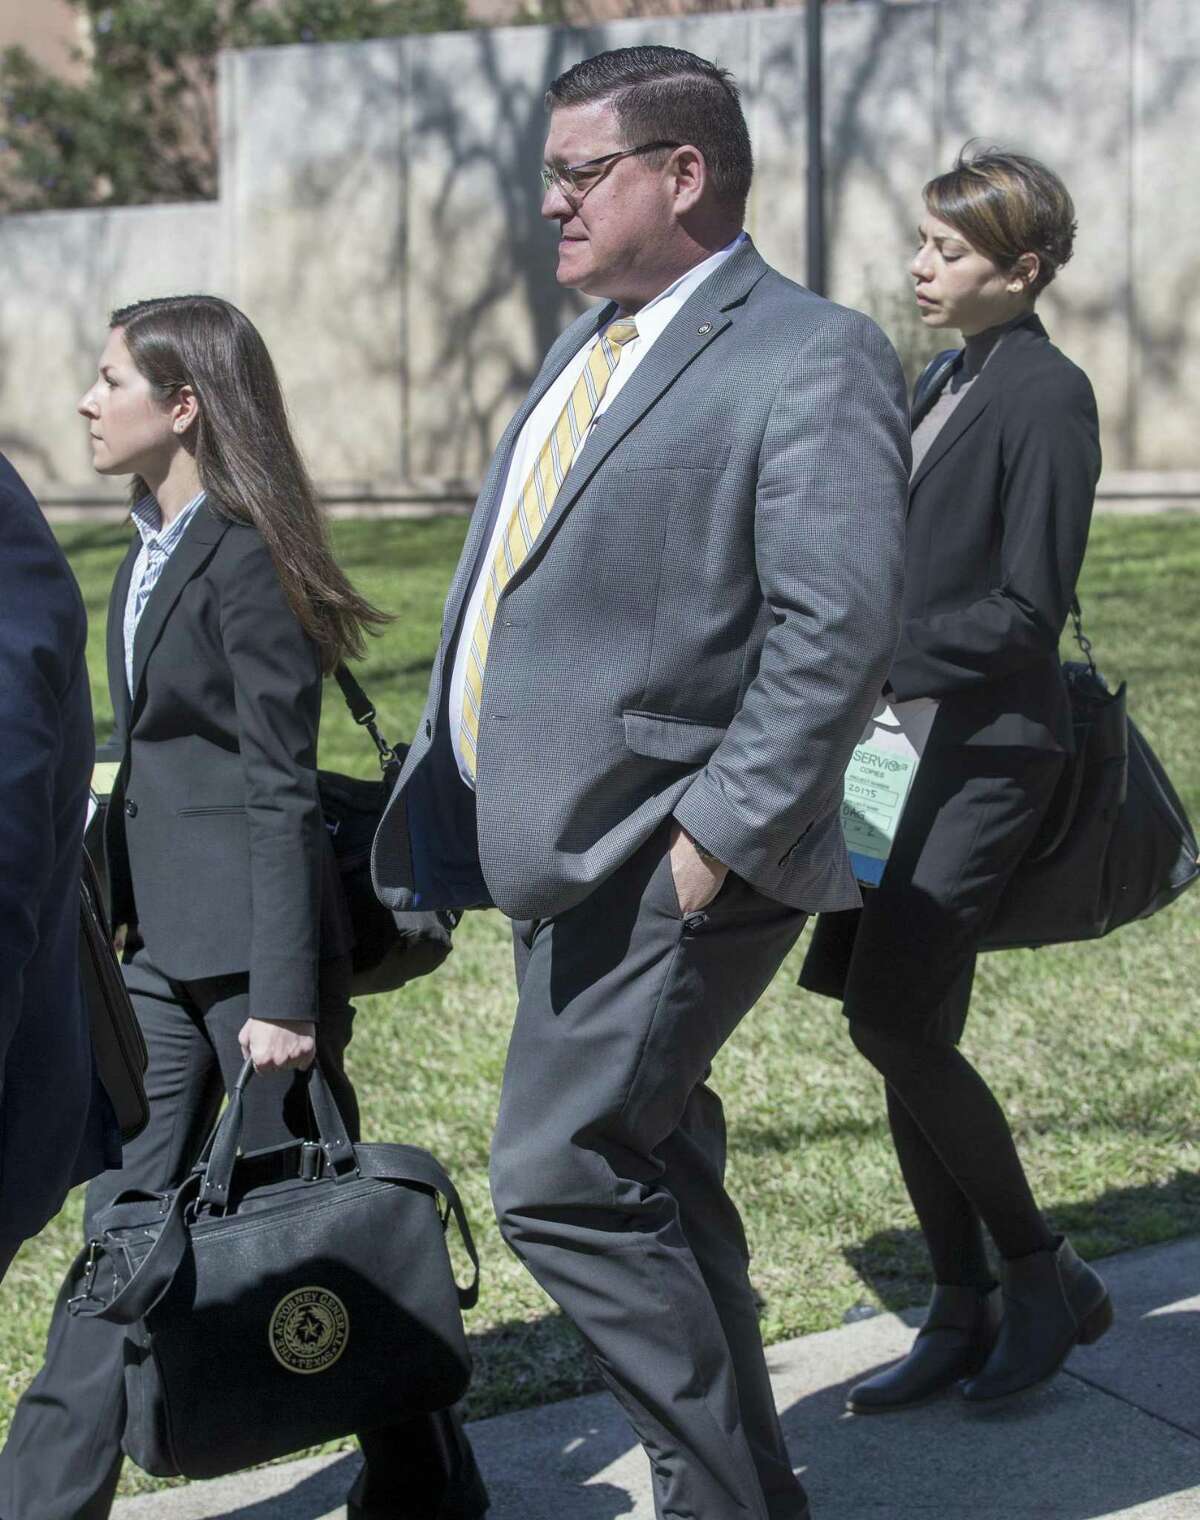 Keith Ingram, center, director of elections at the Texas Secretary of State's office, leaves the John H. Wood Federal Courthouse Tuesday, Feb. 20, 2019 after testifying during a hearing about the state?•s initiative to purge tens of thousands of Texans from voter rolls who officials claim are not U.S. citizens. The League of United Latin American Citizens has sued the state over the plan and is seeking an injunction to stop the plan.